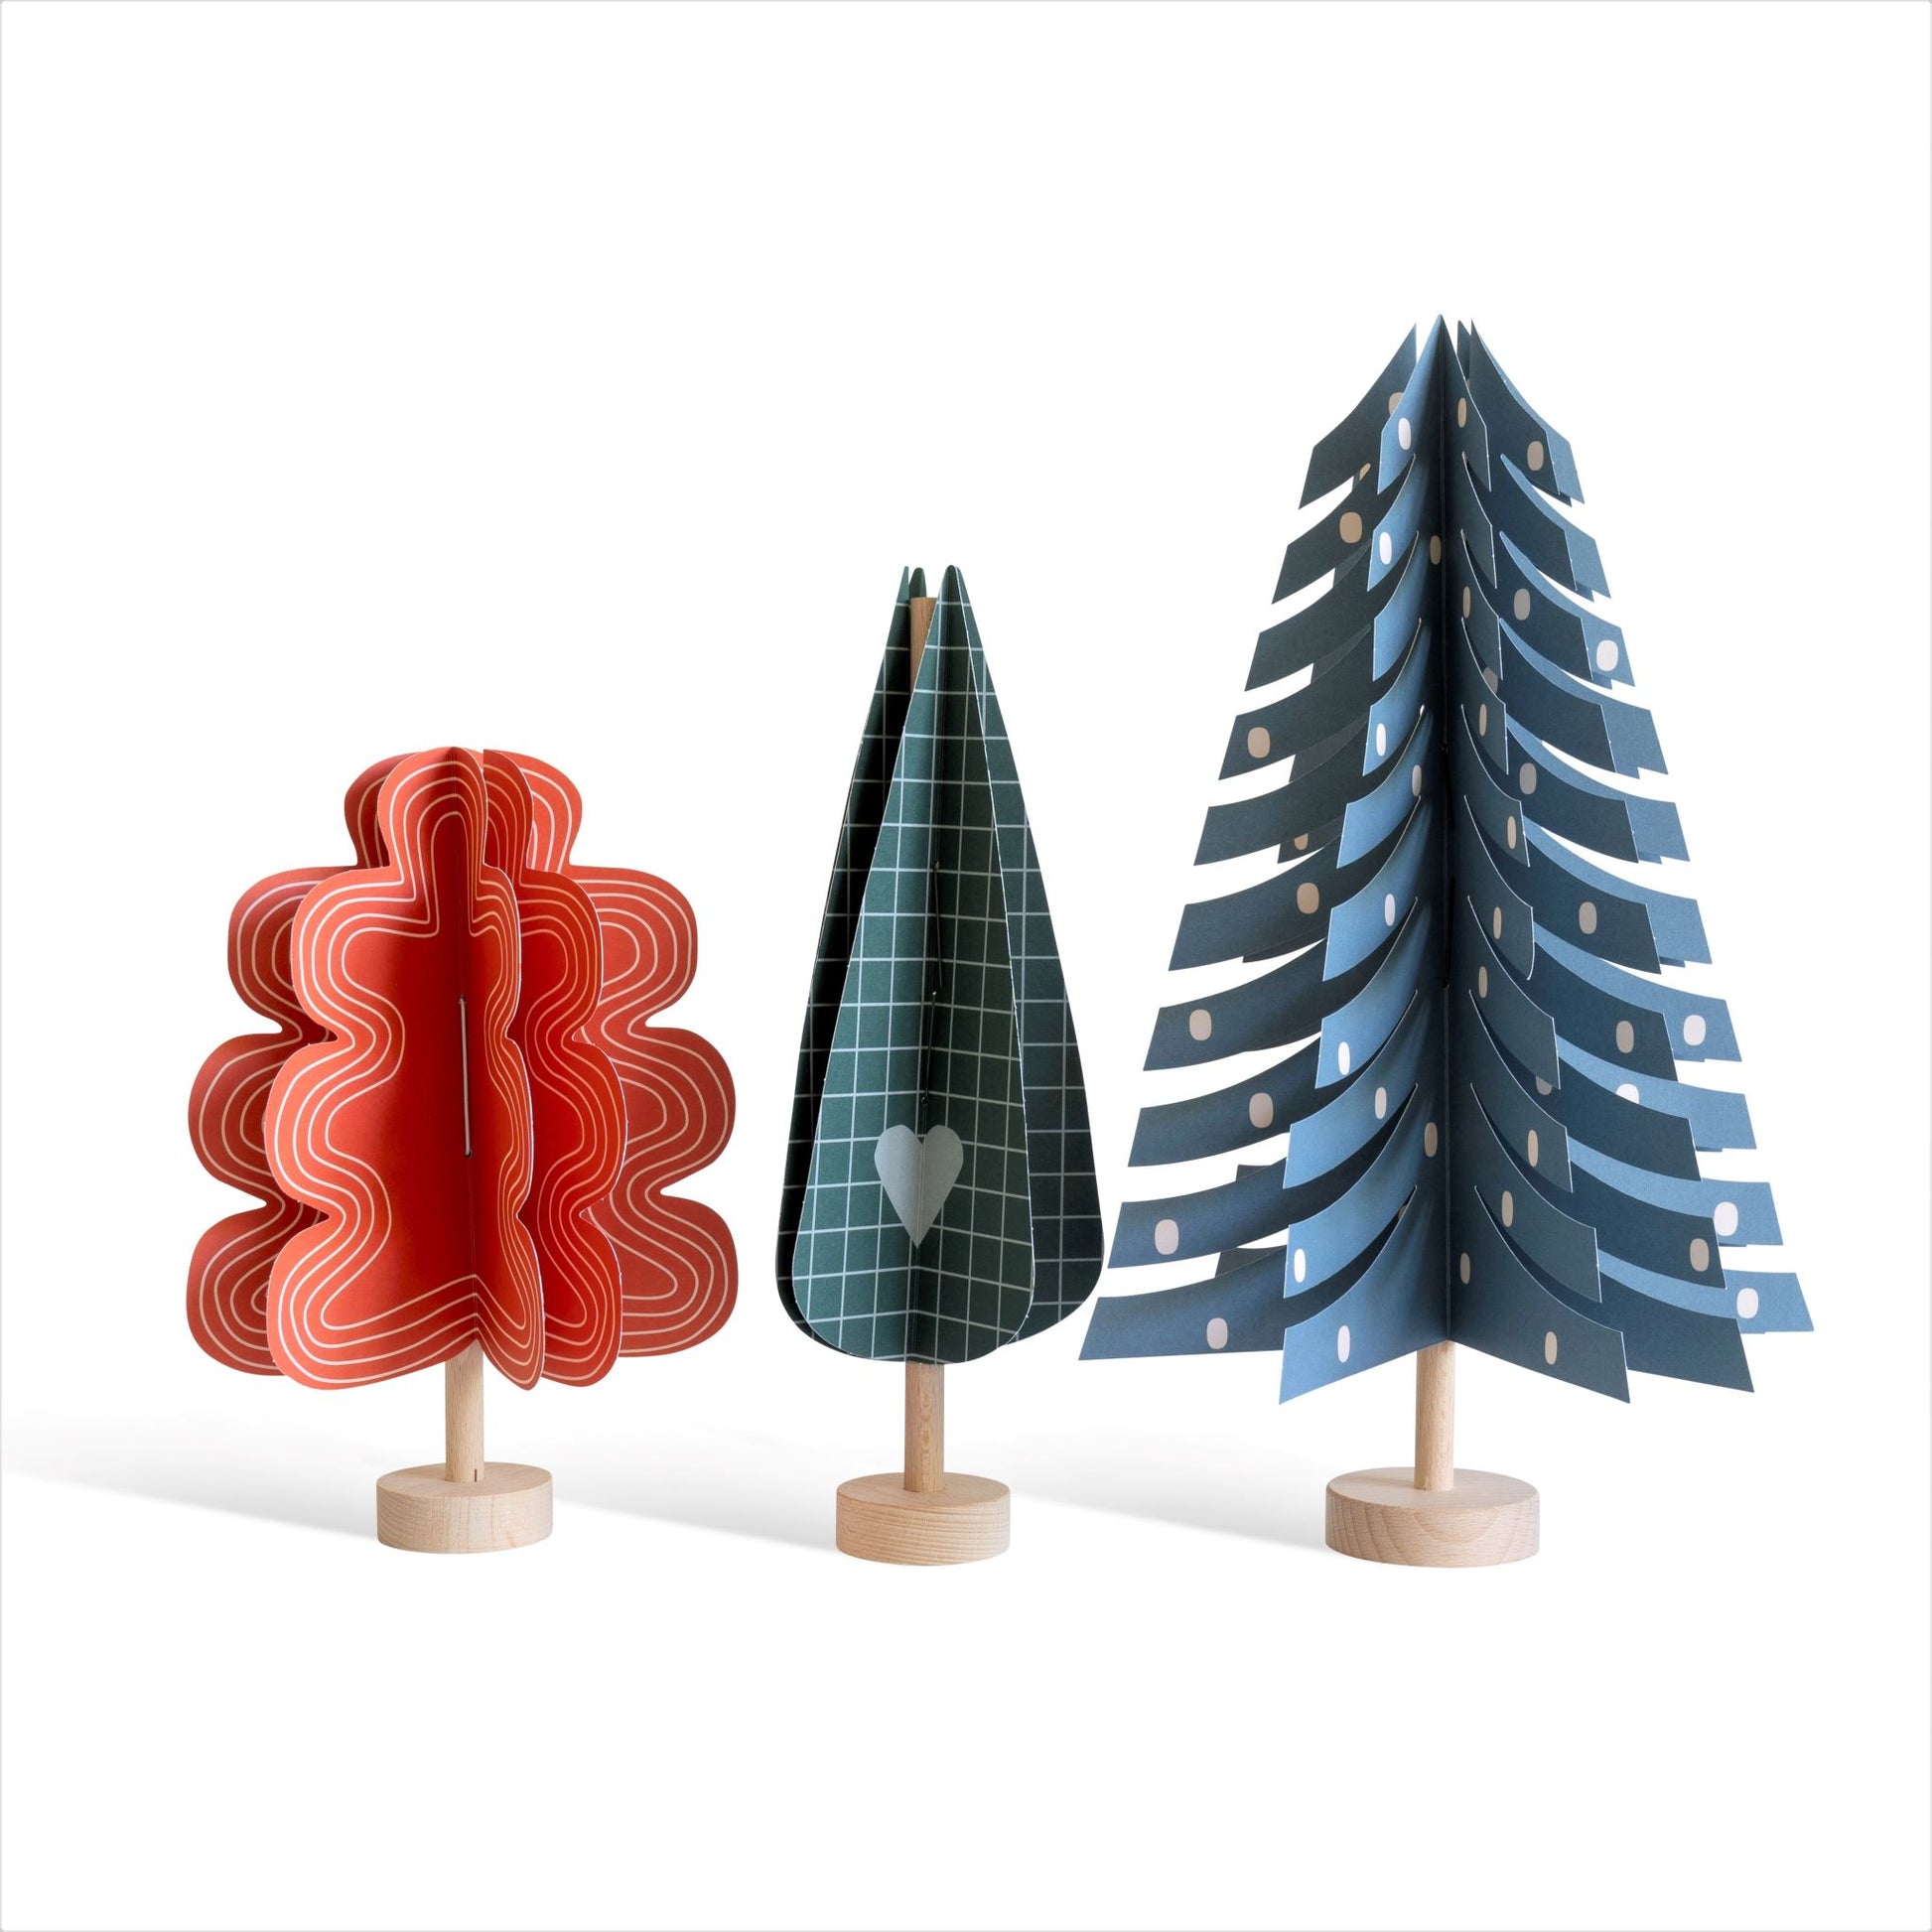 paper craft kit of a dark green cypress tree by Jurianne Matter, pictured with a red oak paper tree and a blue fir paper tree